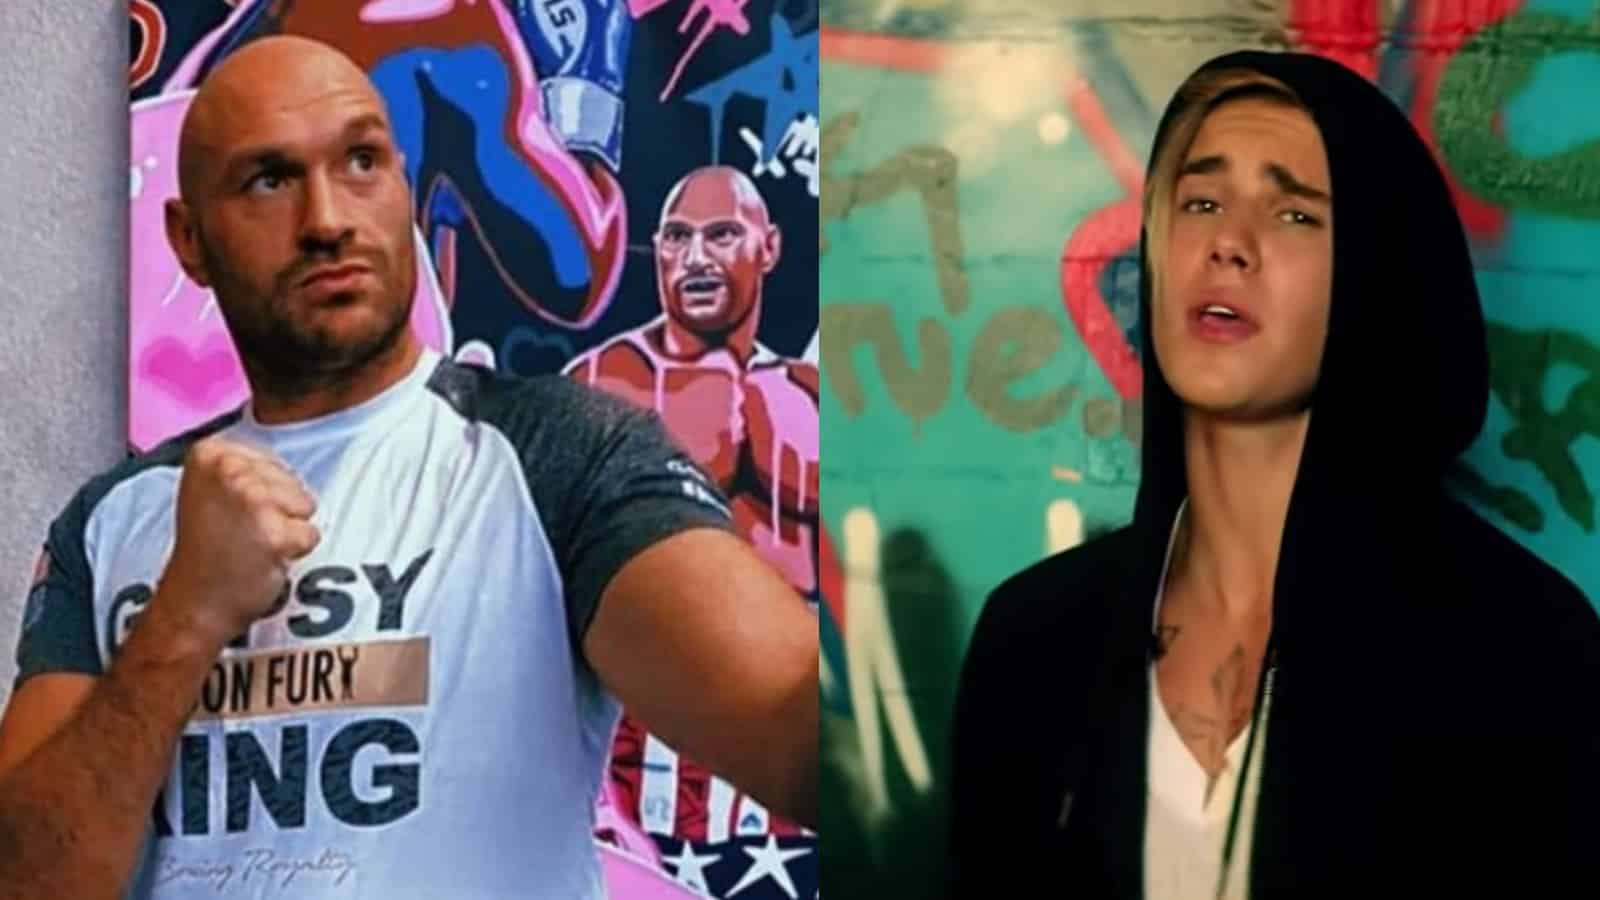 Boxer Tyson Fury with singer Justin Bieber